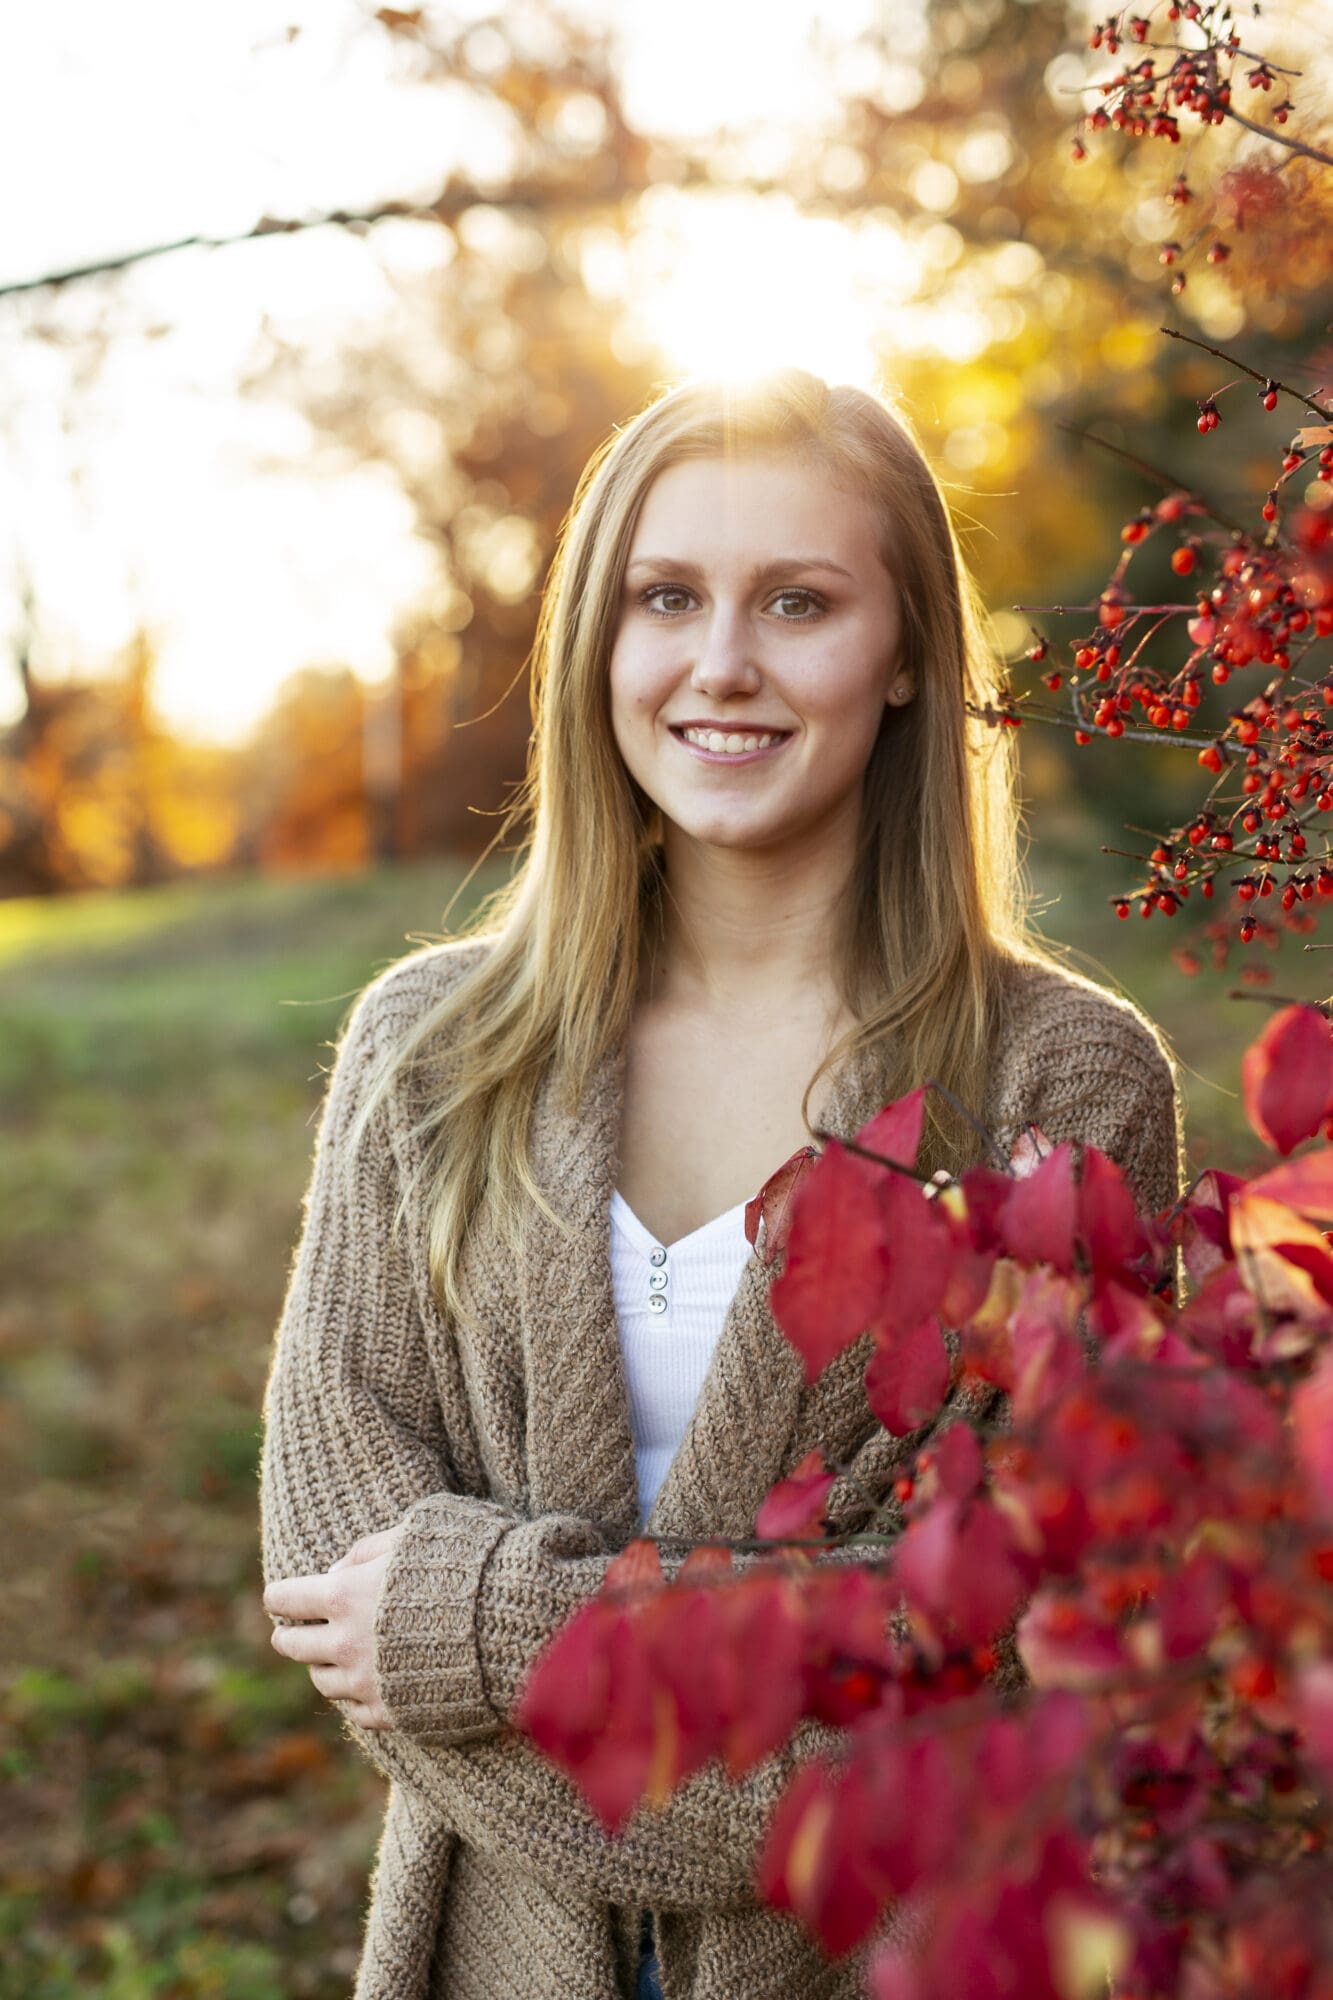 girl senior photo with red leaves and berries and sun flare at golden hour